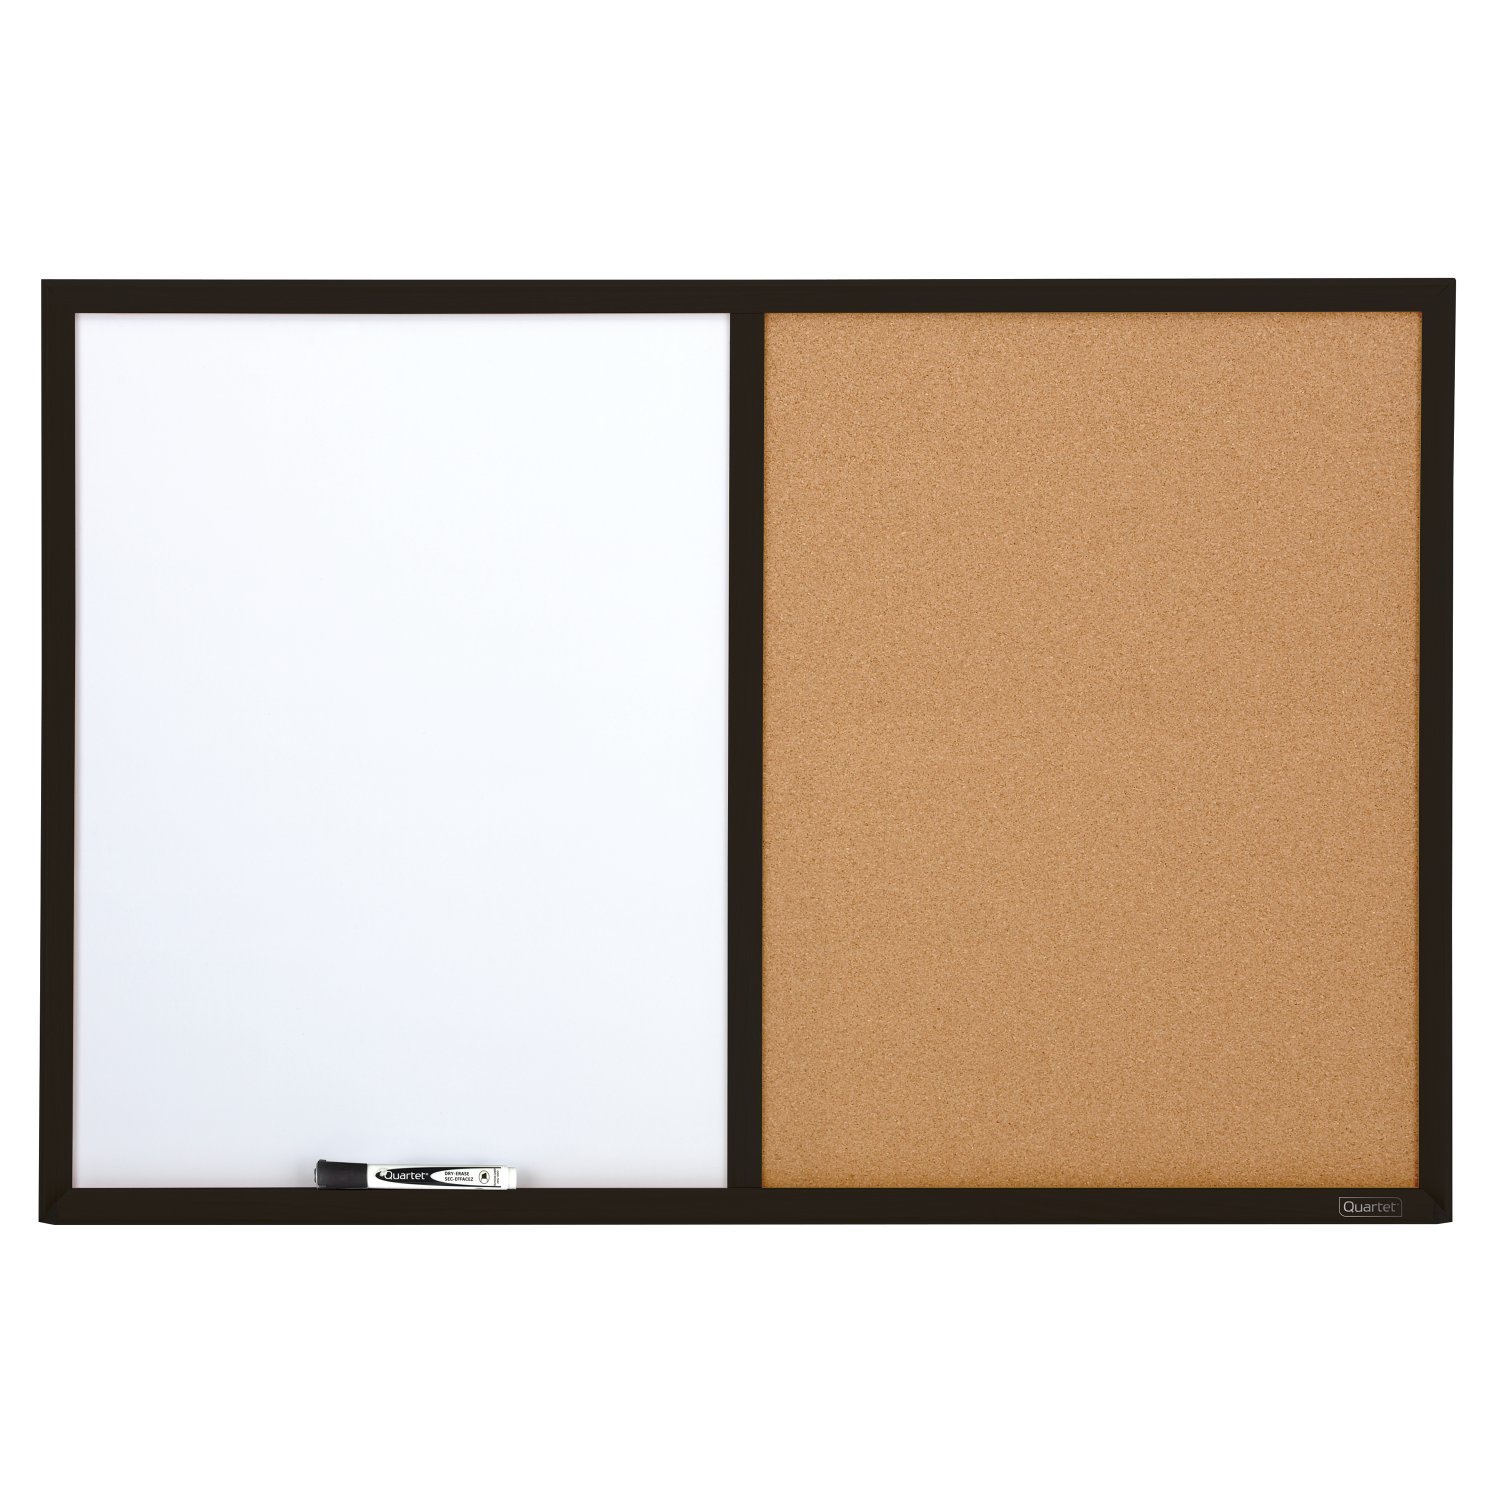 White board combined with cork noteboard